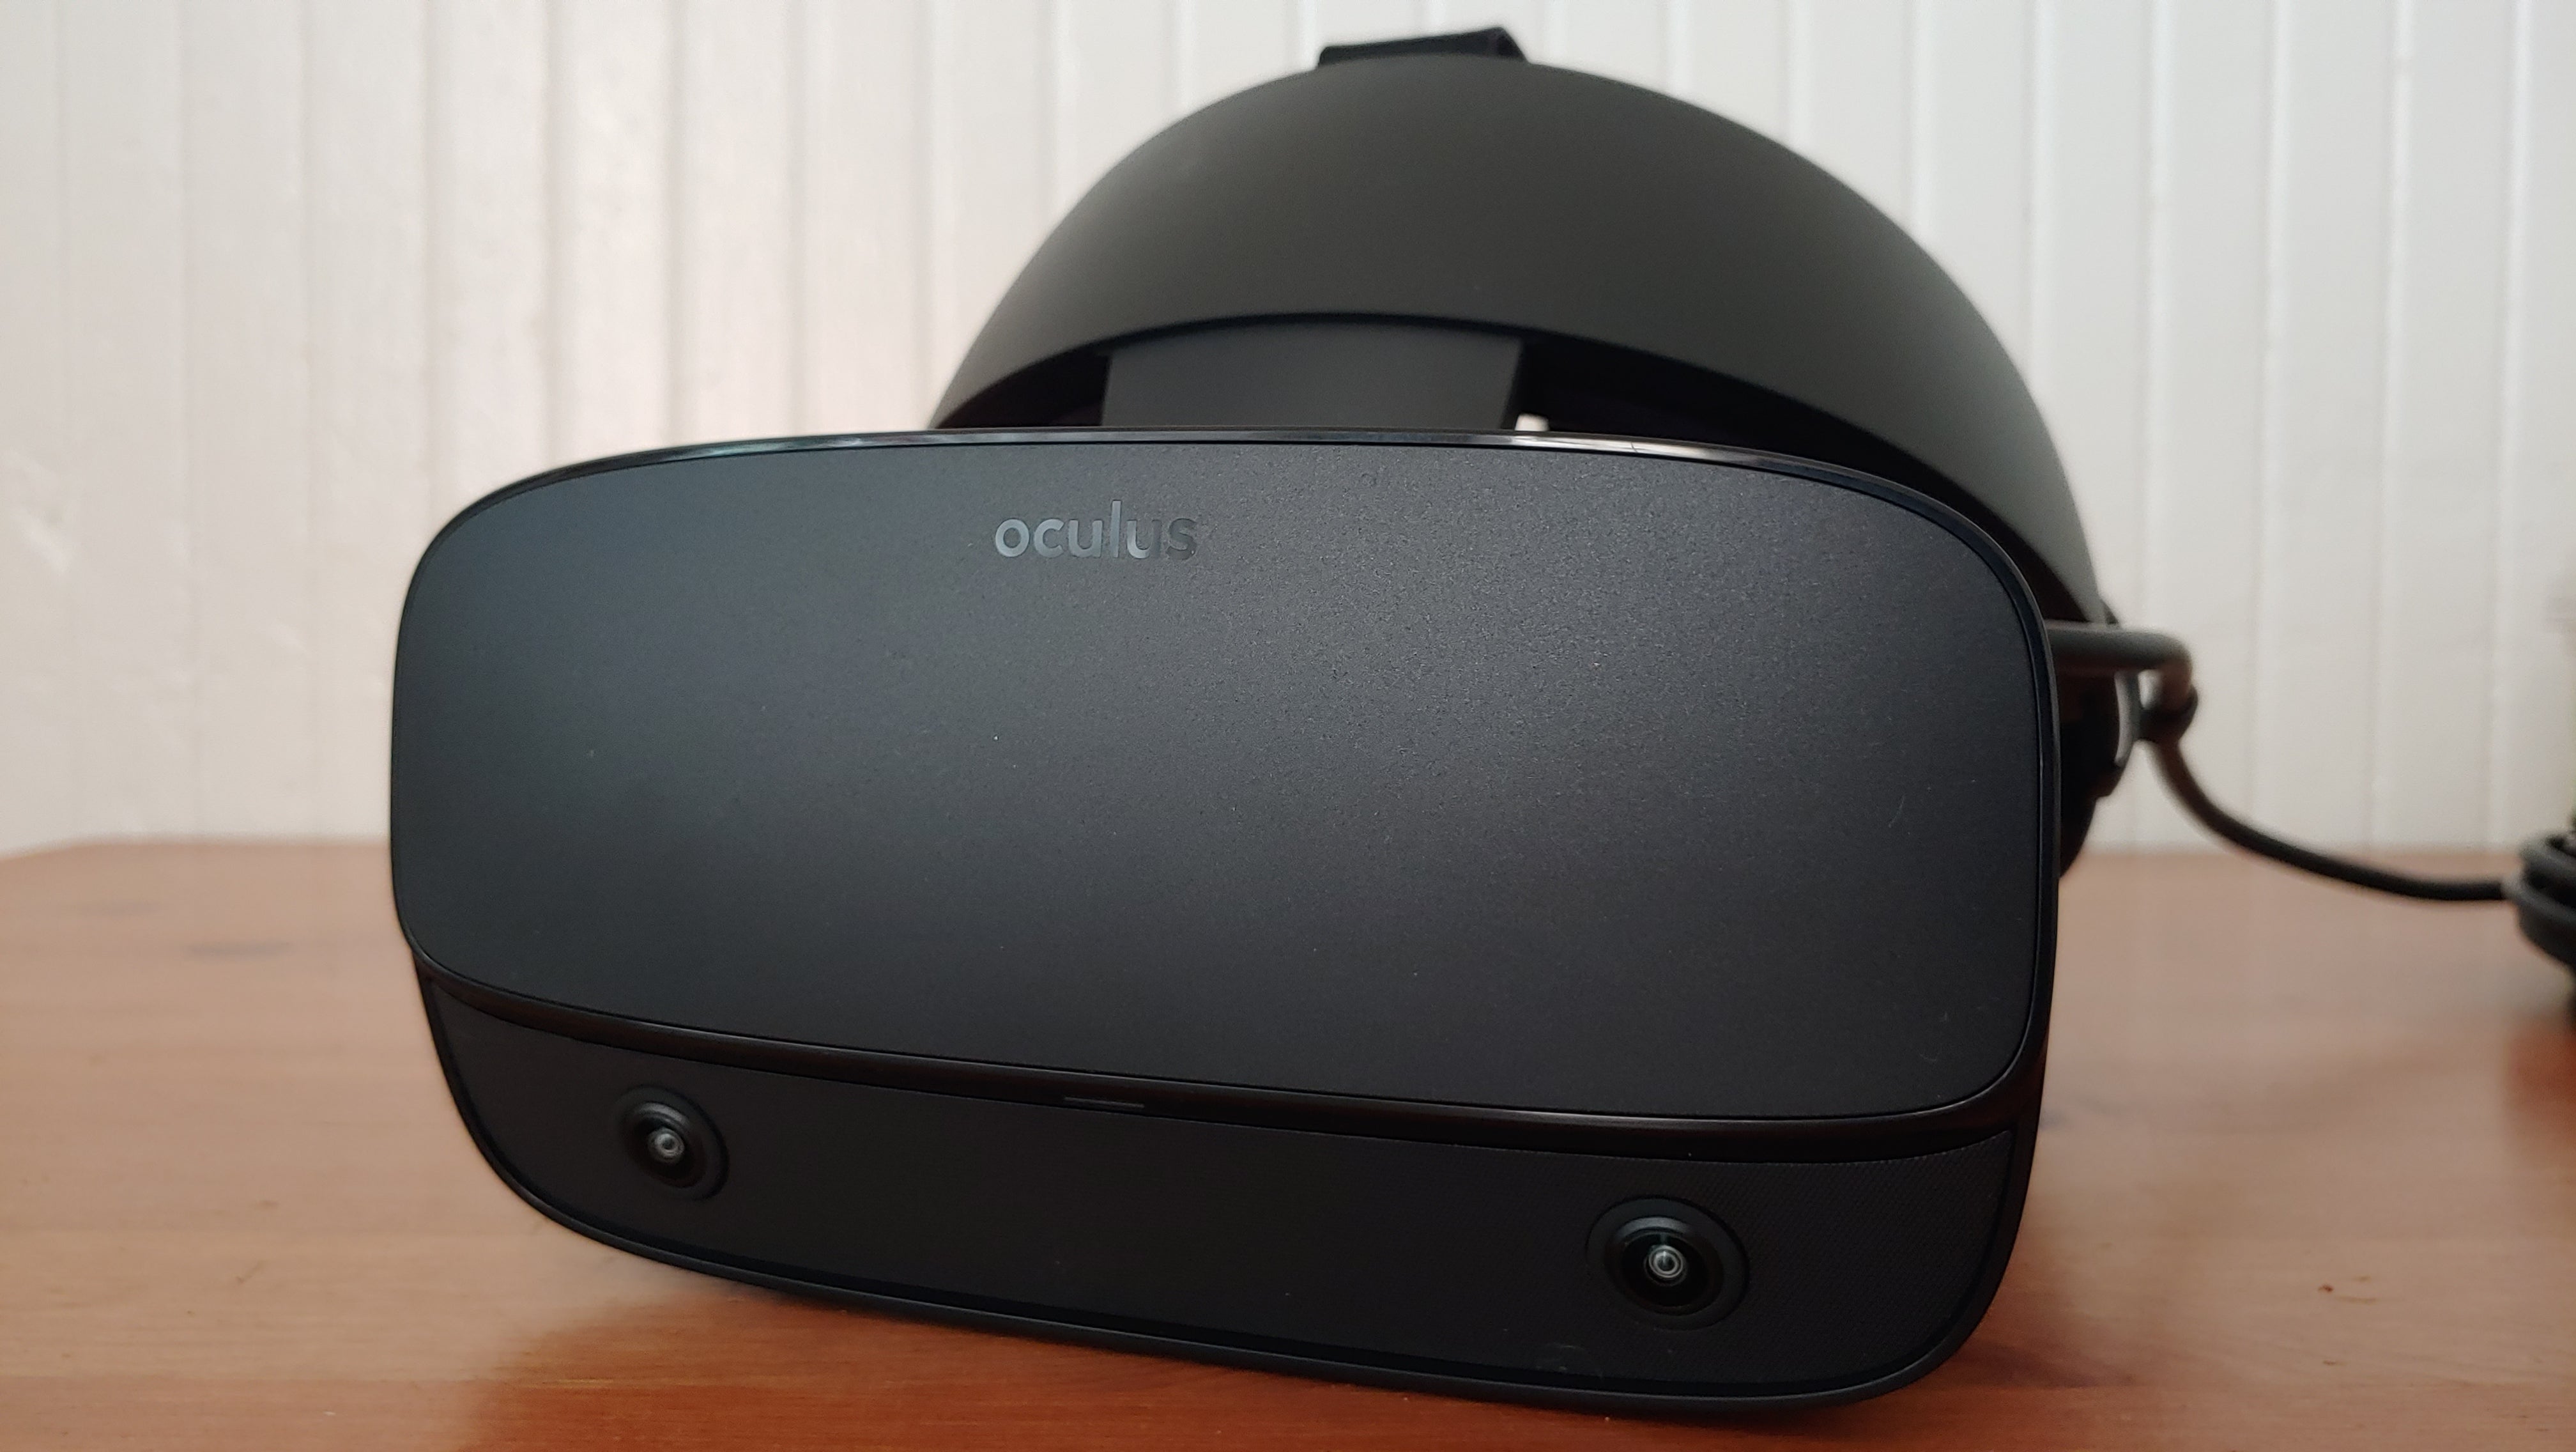 Oculus Rift S review: The second generation of PC-based virtual reality